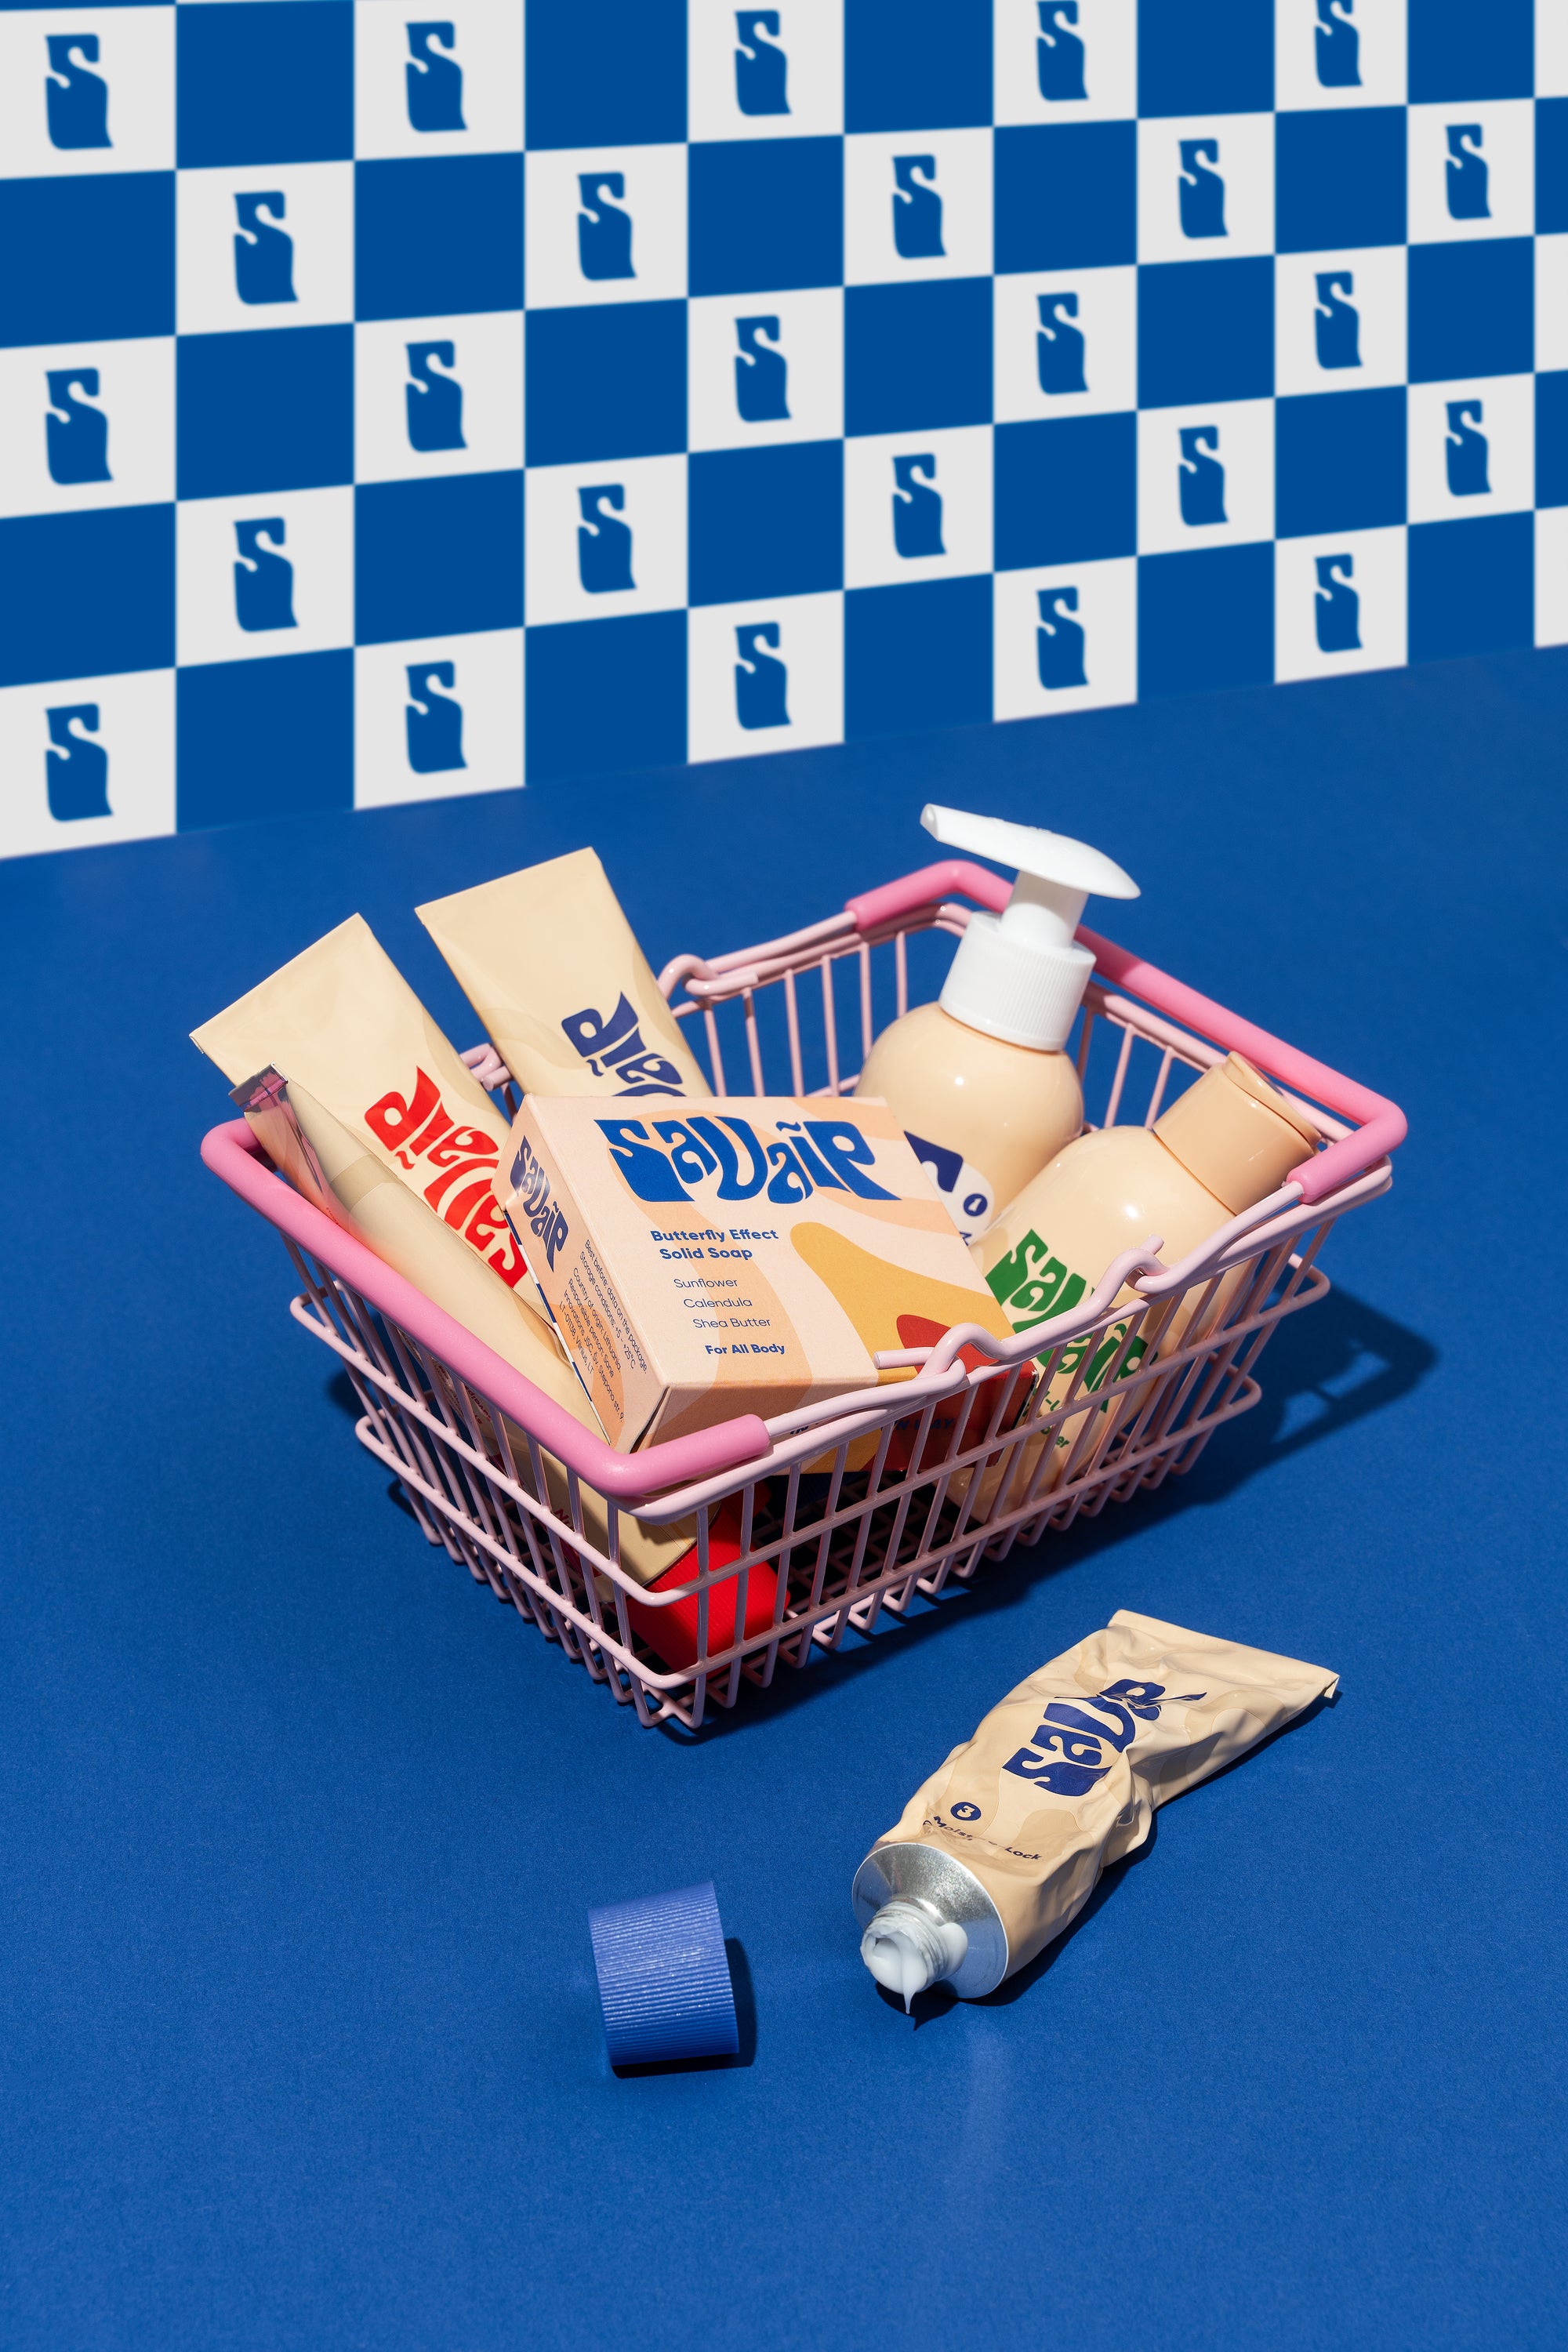 Miniature shopping basket filled with Savaip skincare and beauty products against a blue background with a repeated 'S'  Savaip Skin pattern; an open Savaip Moisture-Lock cream tube lies next to the basket.